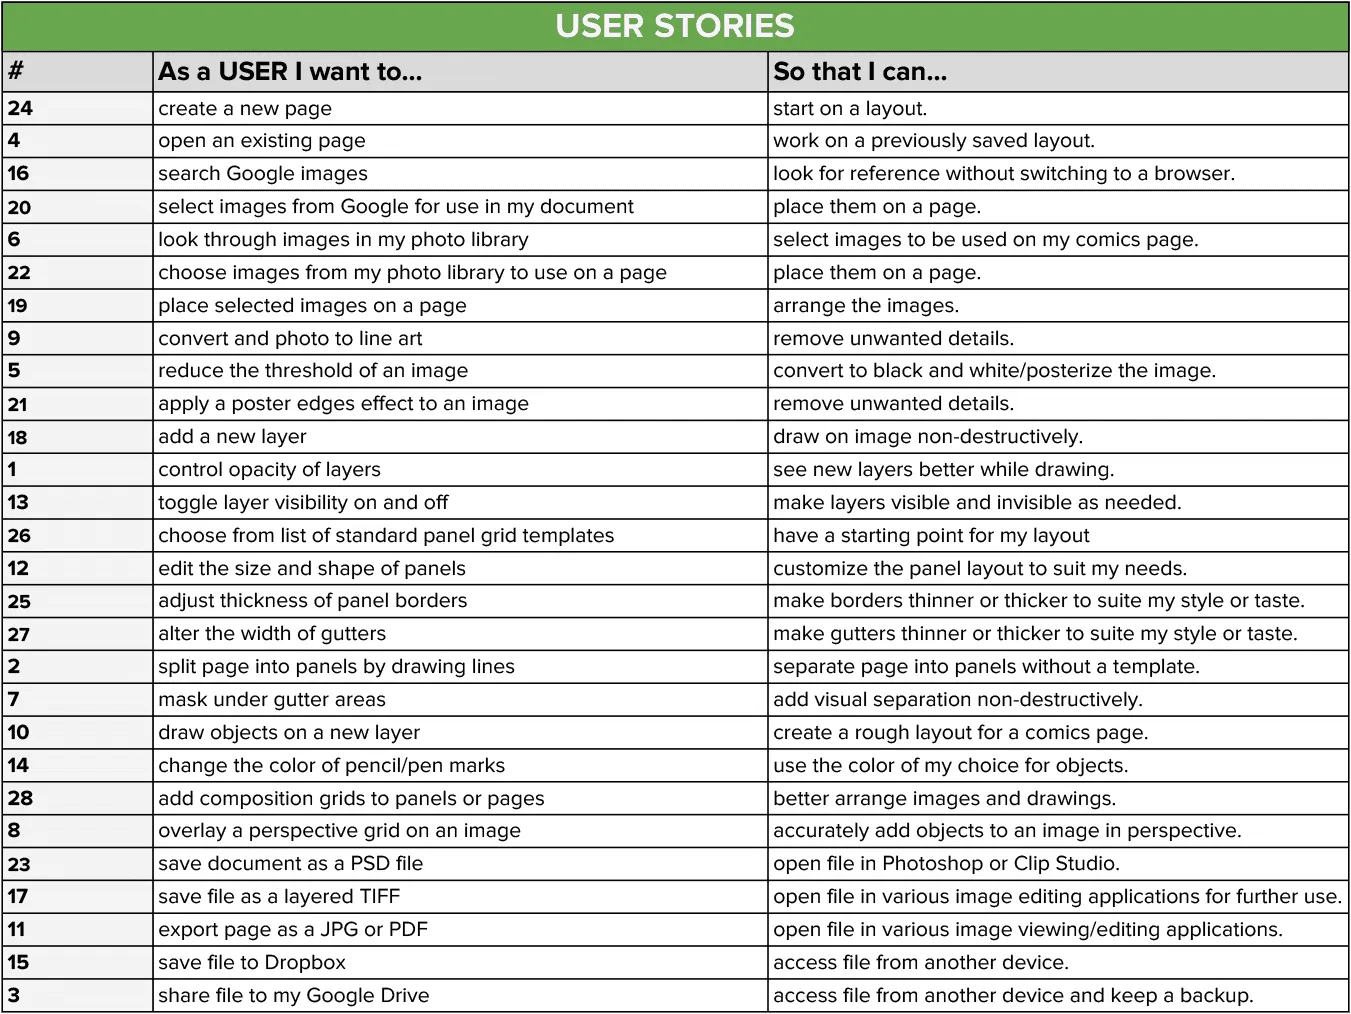 The user stories helped me to keep my design user focused. They were also very effective at preventing the dreaded feature creep.